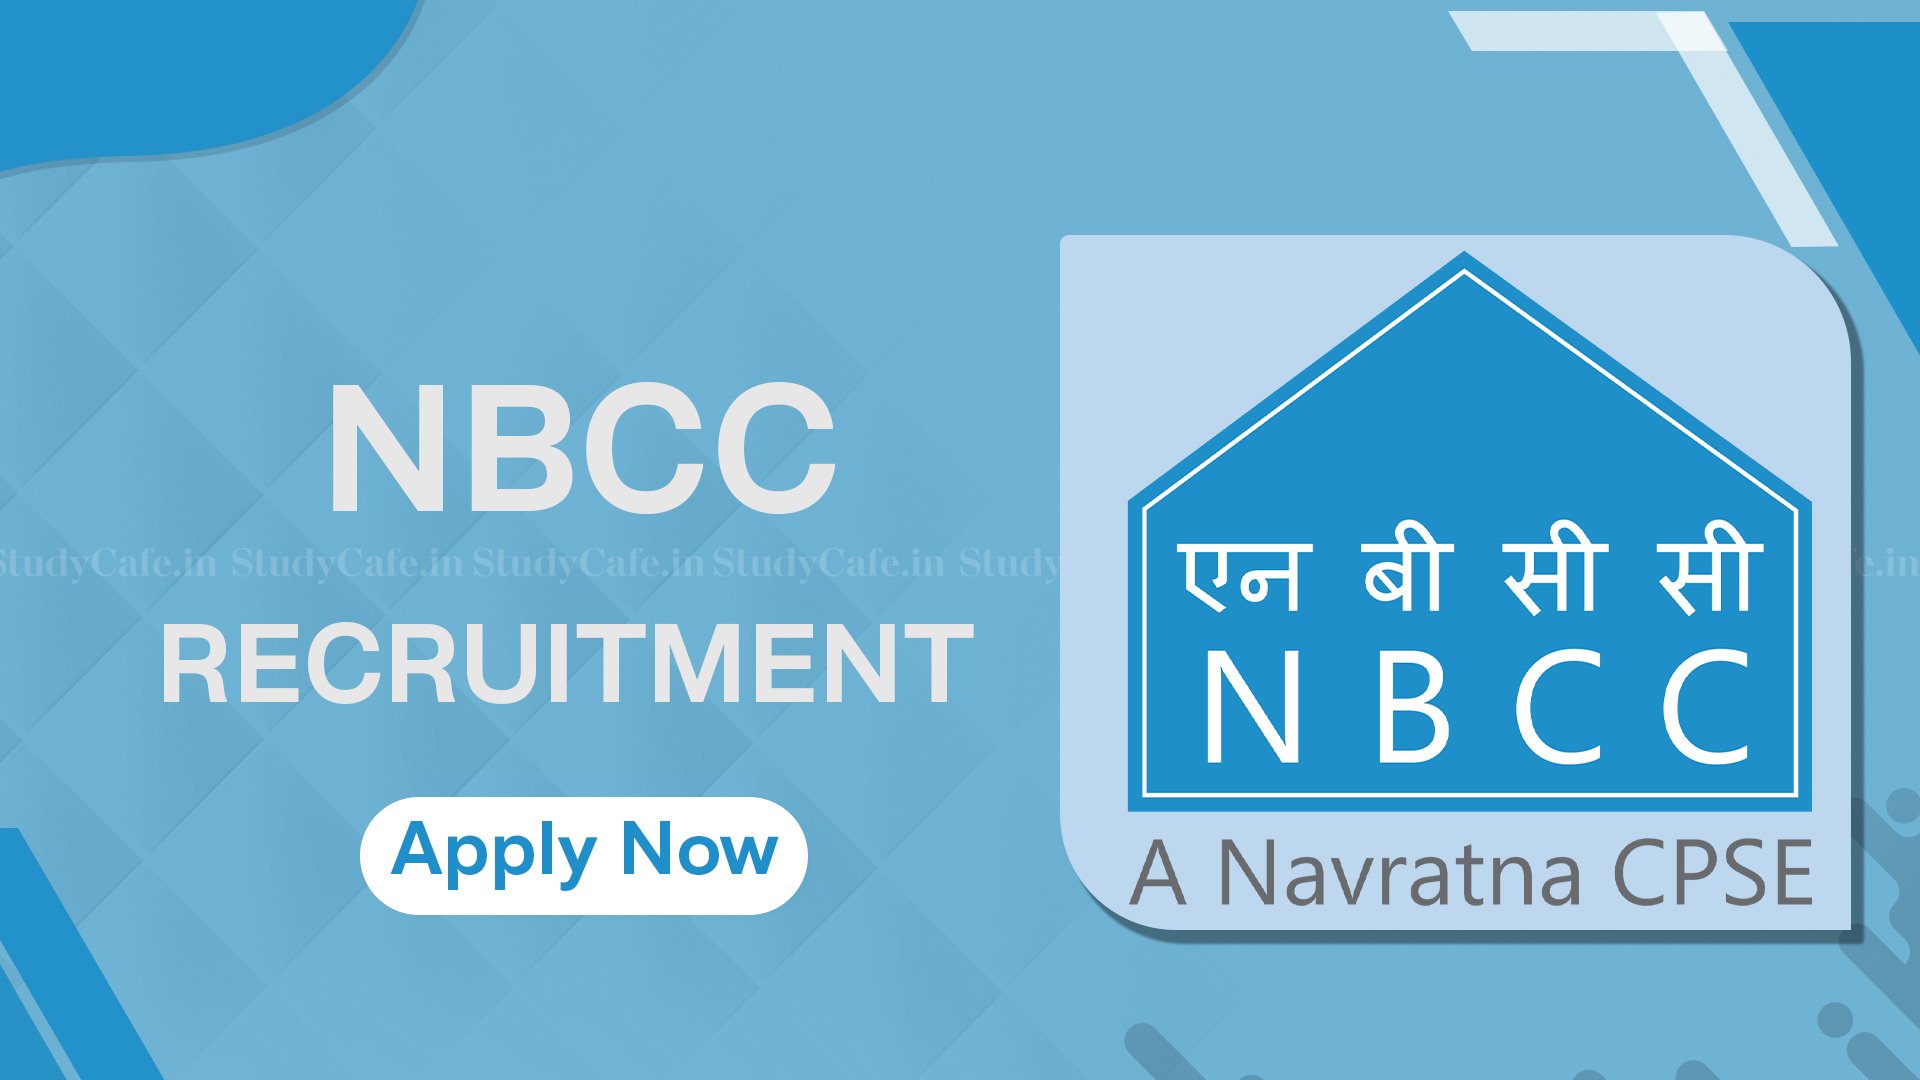 NBCC Recruitment 2022: Check Post, Qualifications, Application Procedure, and Other Details Here